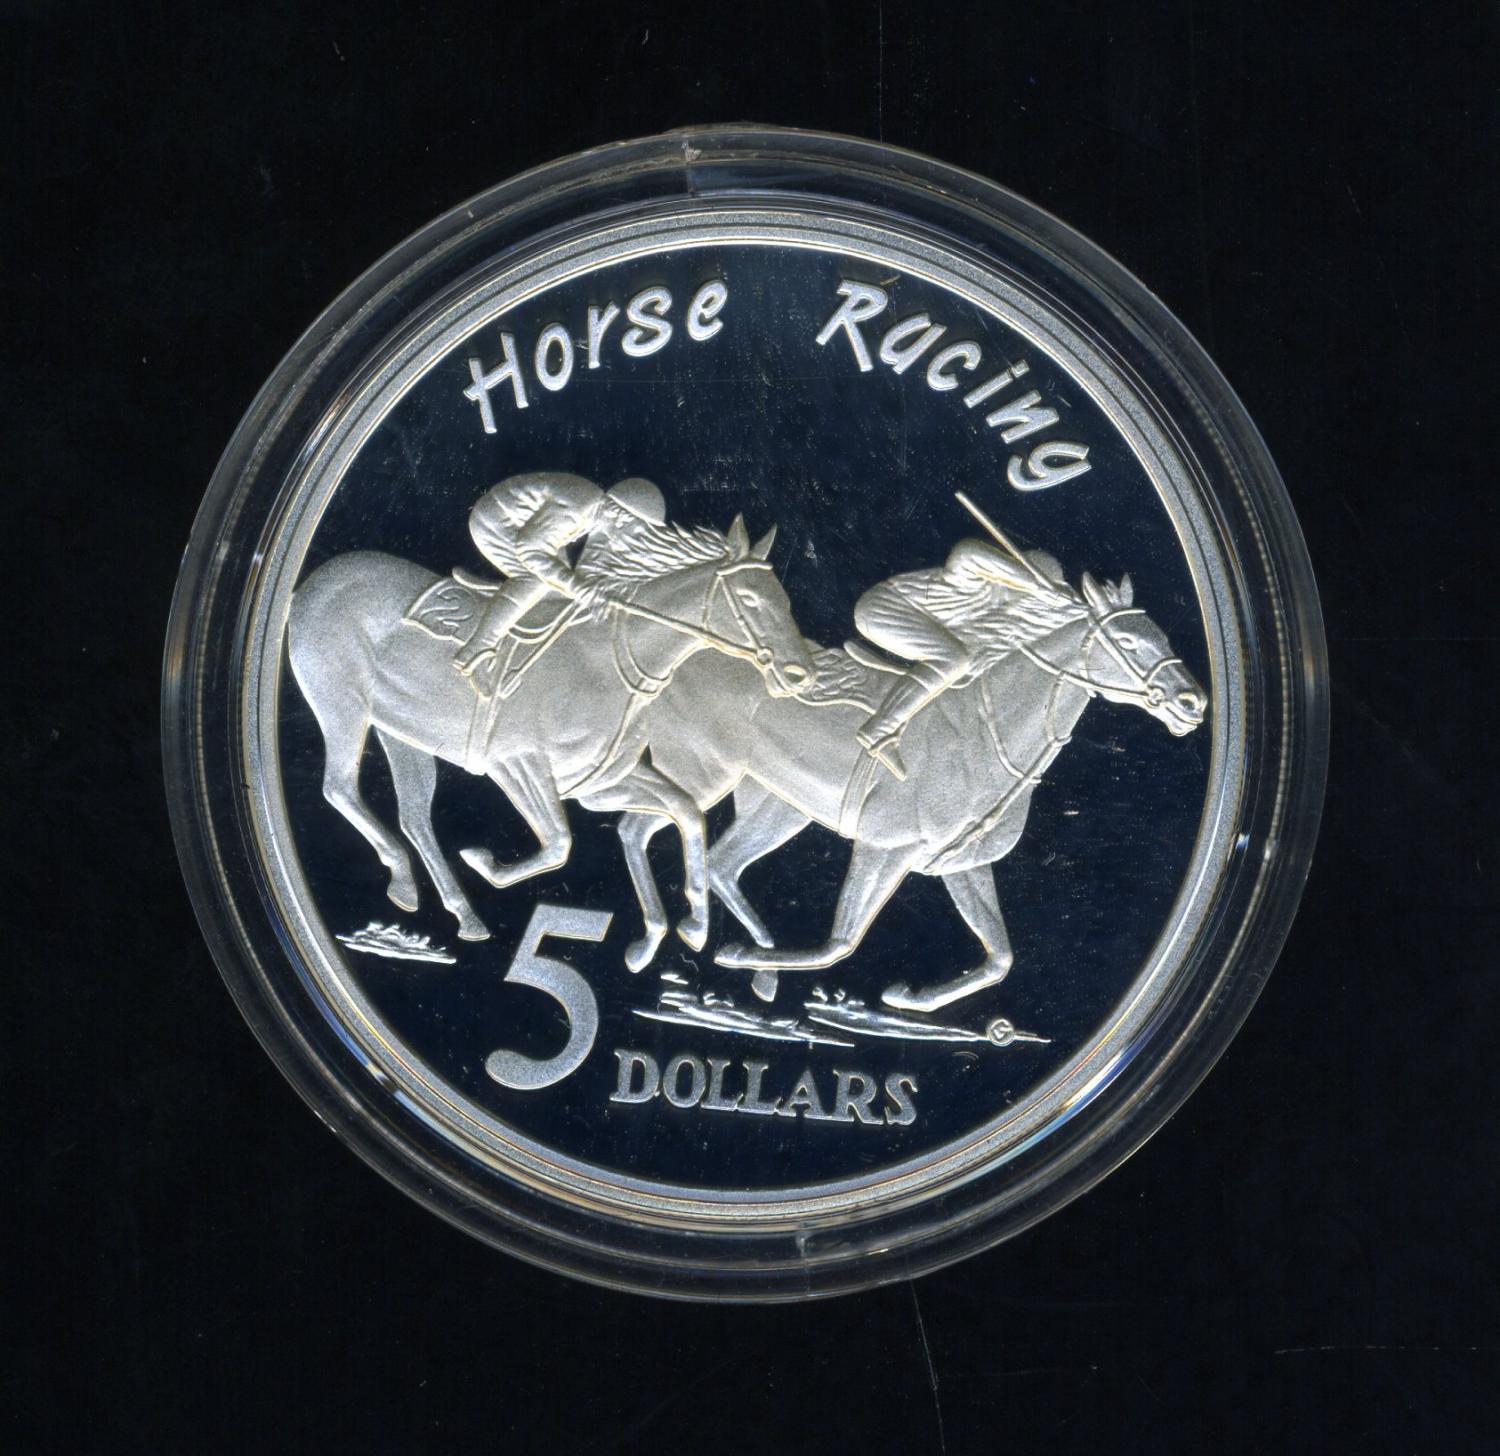 Thumbnail for 1996 Australian $5 Silver Coin From Masterpieces Set - Horse Racing.  The Coin is Sterling Silver and contains over 1oz of Pure Silver.